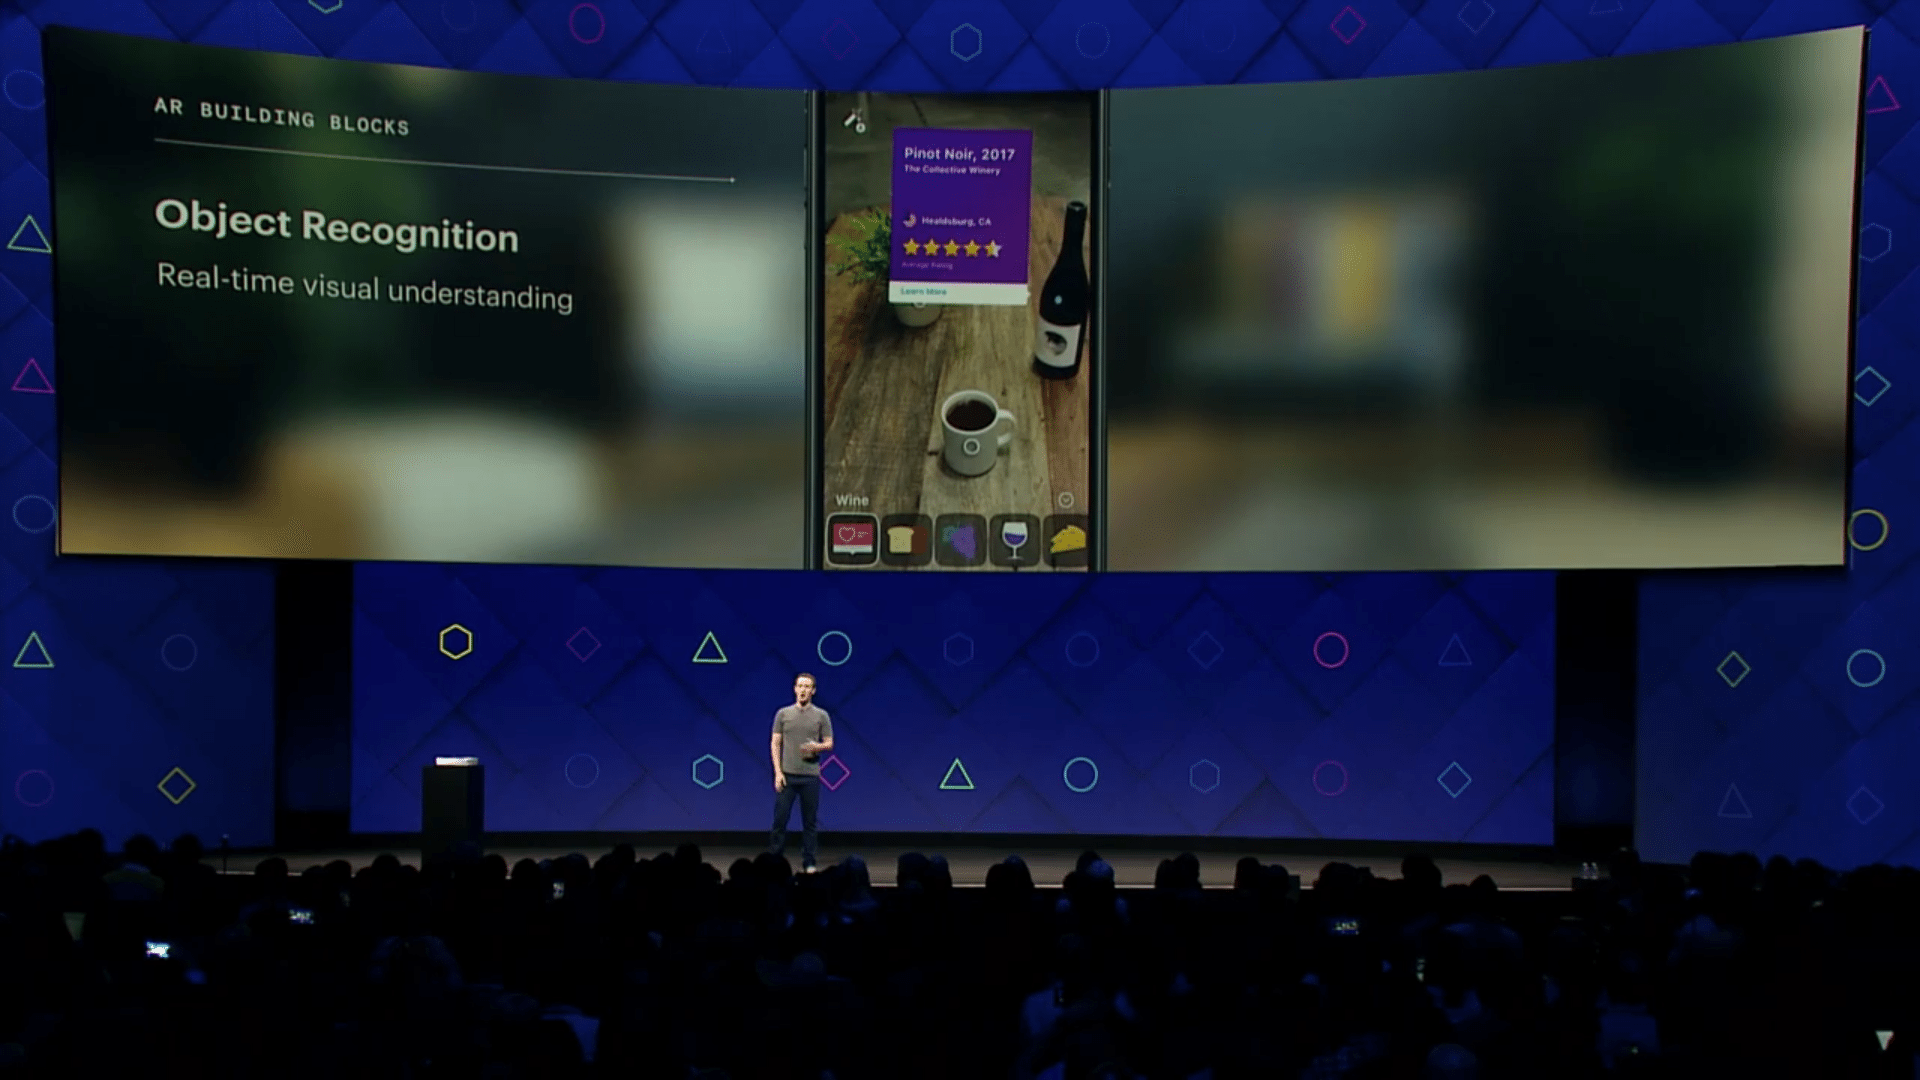 F8 2017 Recap: 10 Major Announcements Every Marketer Should Know